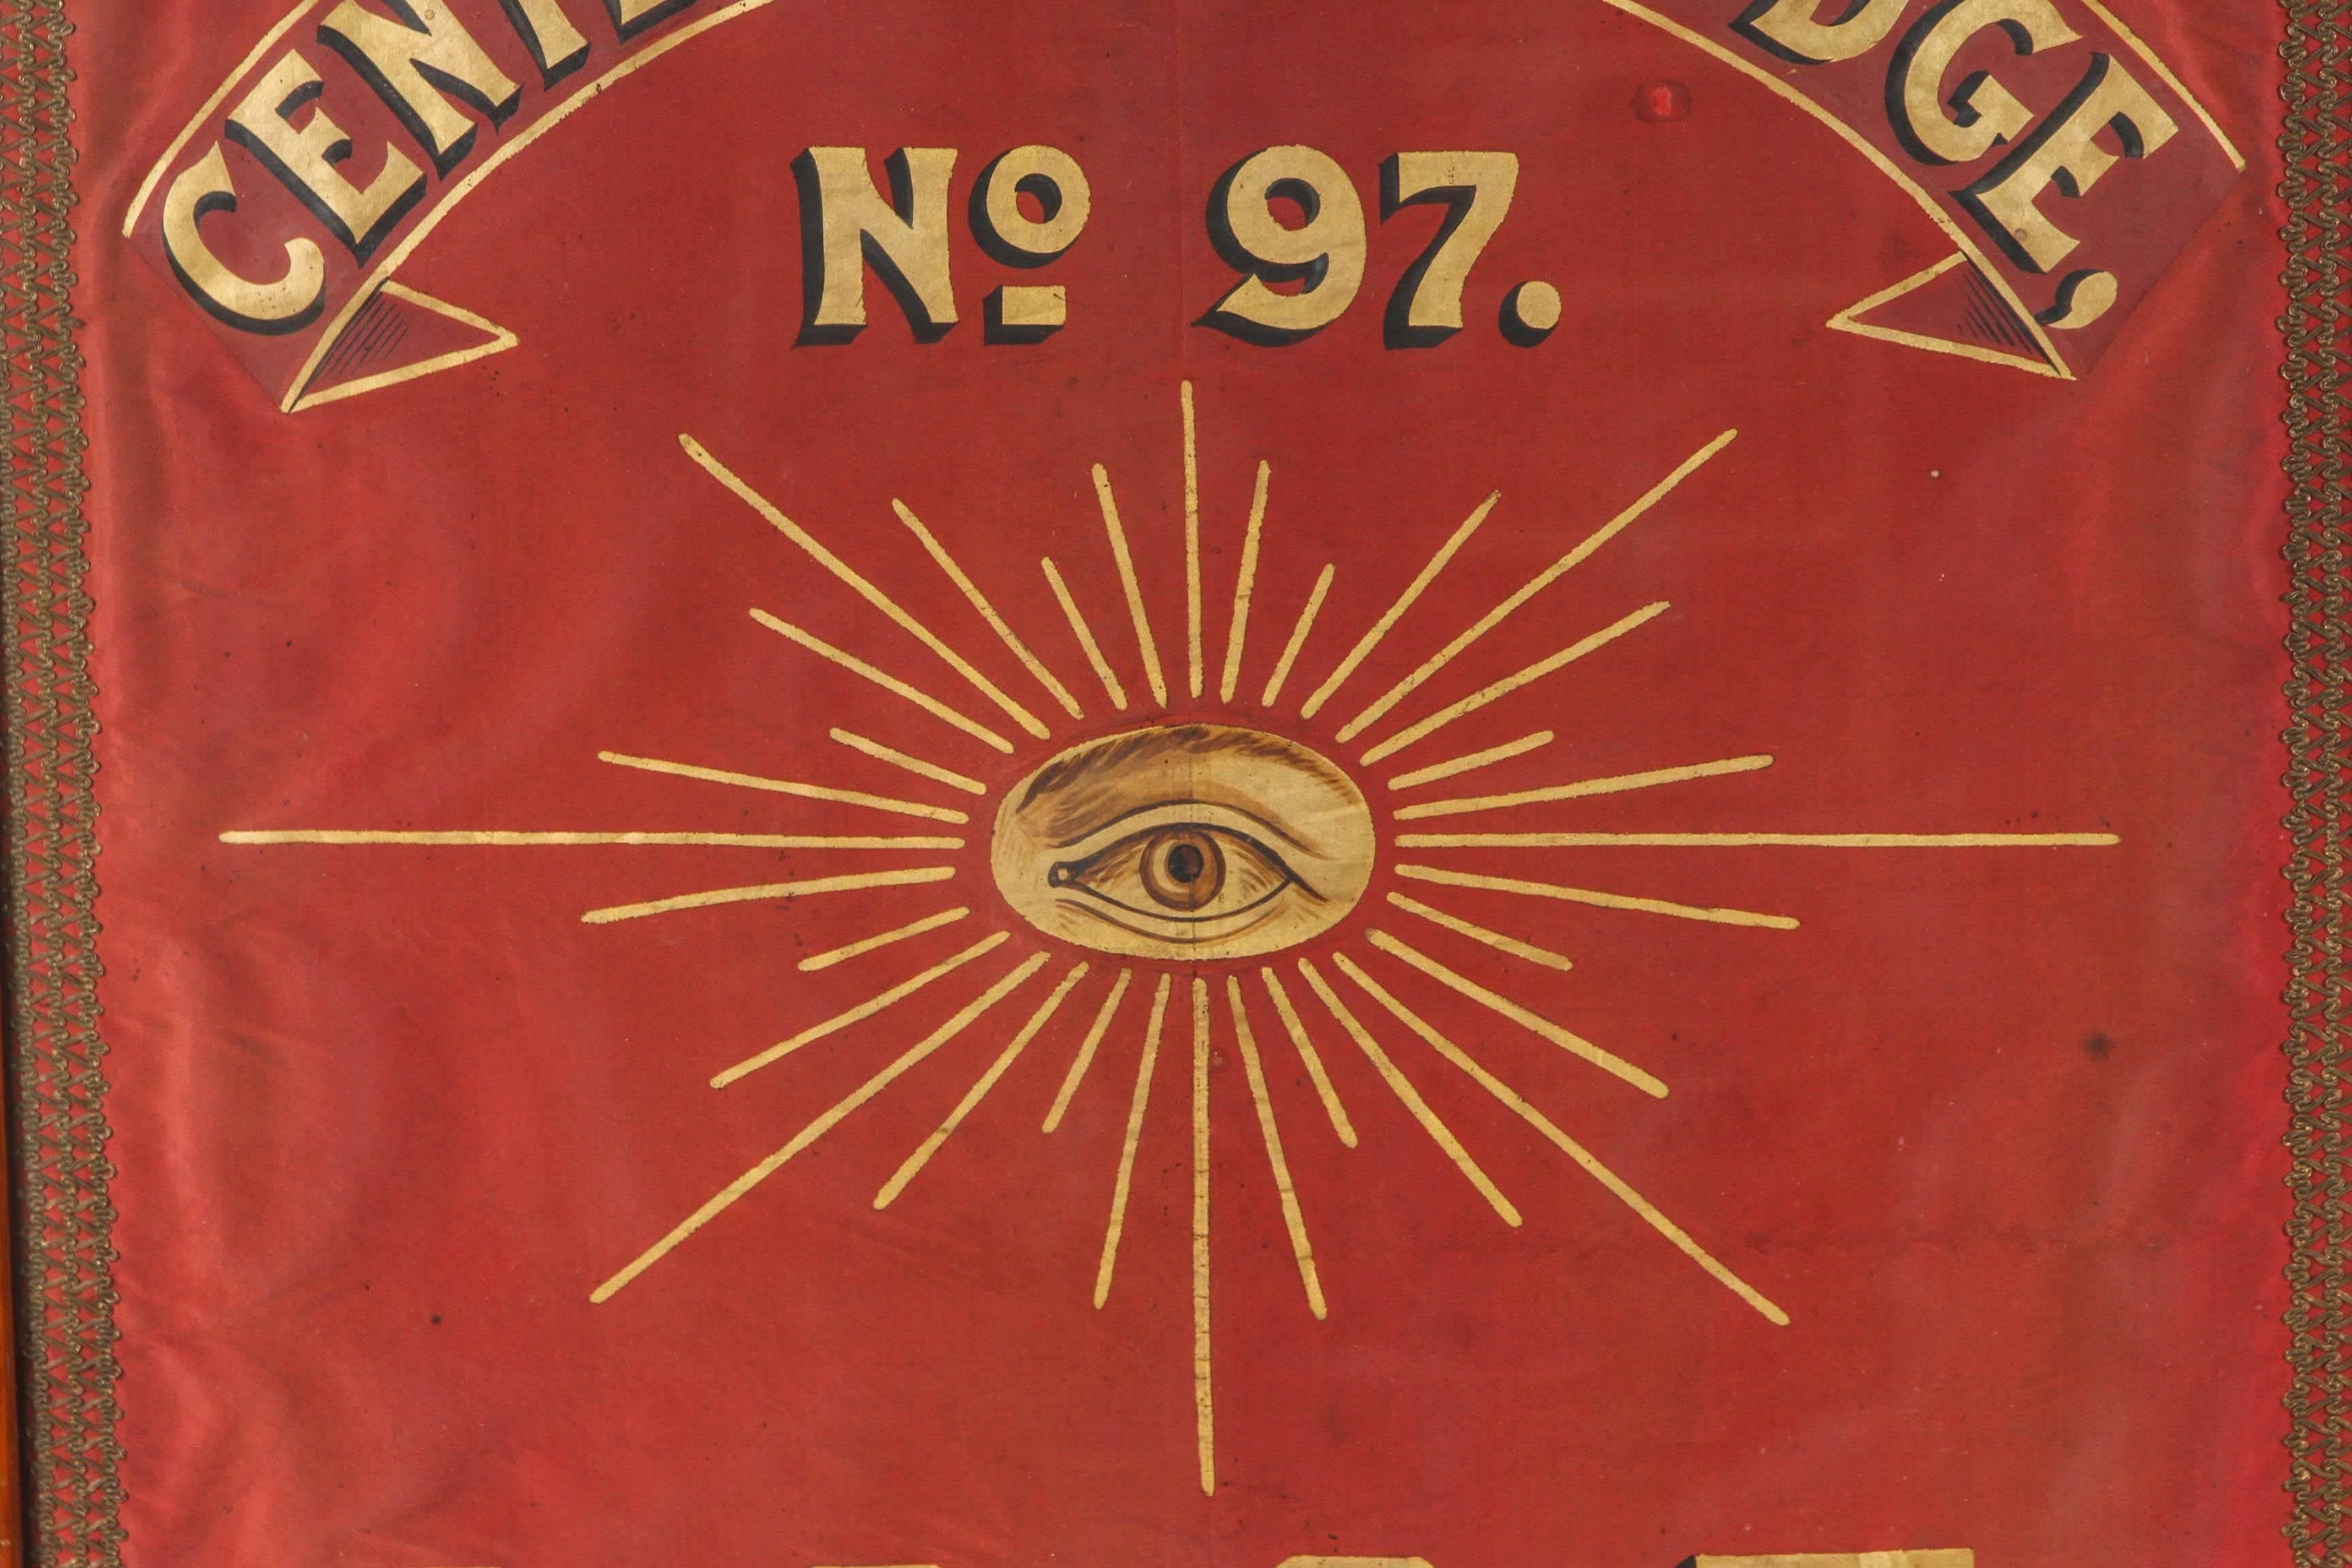 Early 1880s Odd Fellows Lodge all-seeing eye banner from Centerville, Dakota. Excellent hand painting and lettering. Centerville was platted in 1883. Dakota became the states of North and South Dakota in 1889. The area is now part of the Sioux Falls